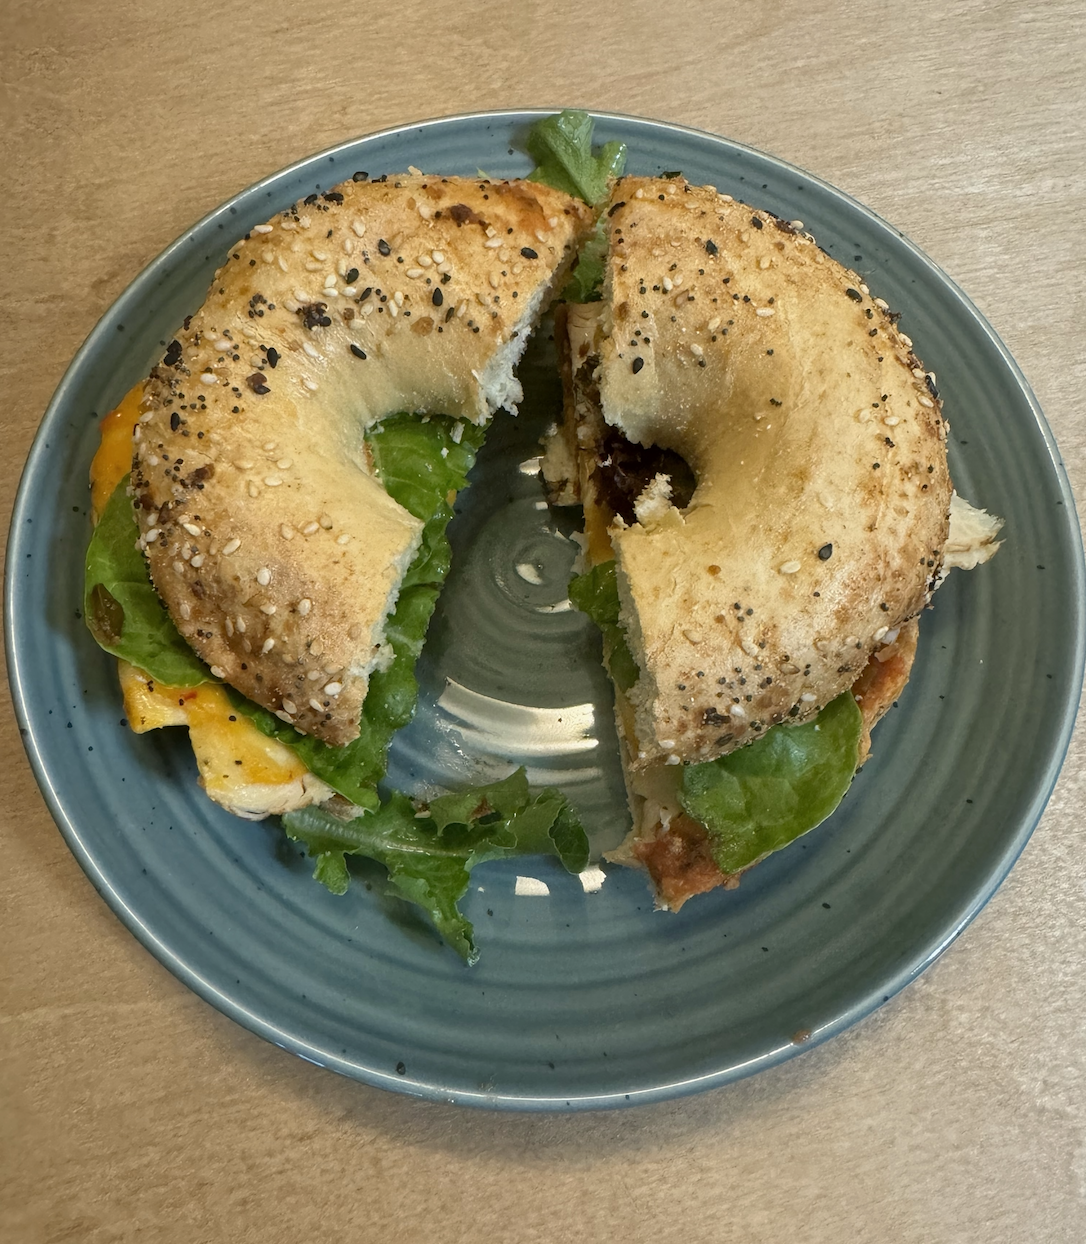 An everything bagel cut in half with chicken, cheese, and greens on a plate